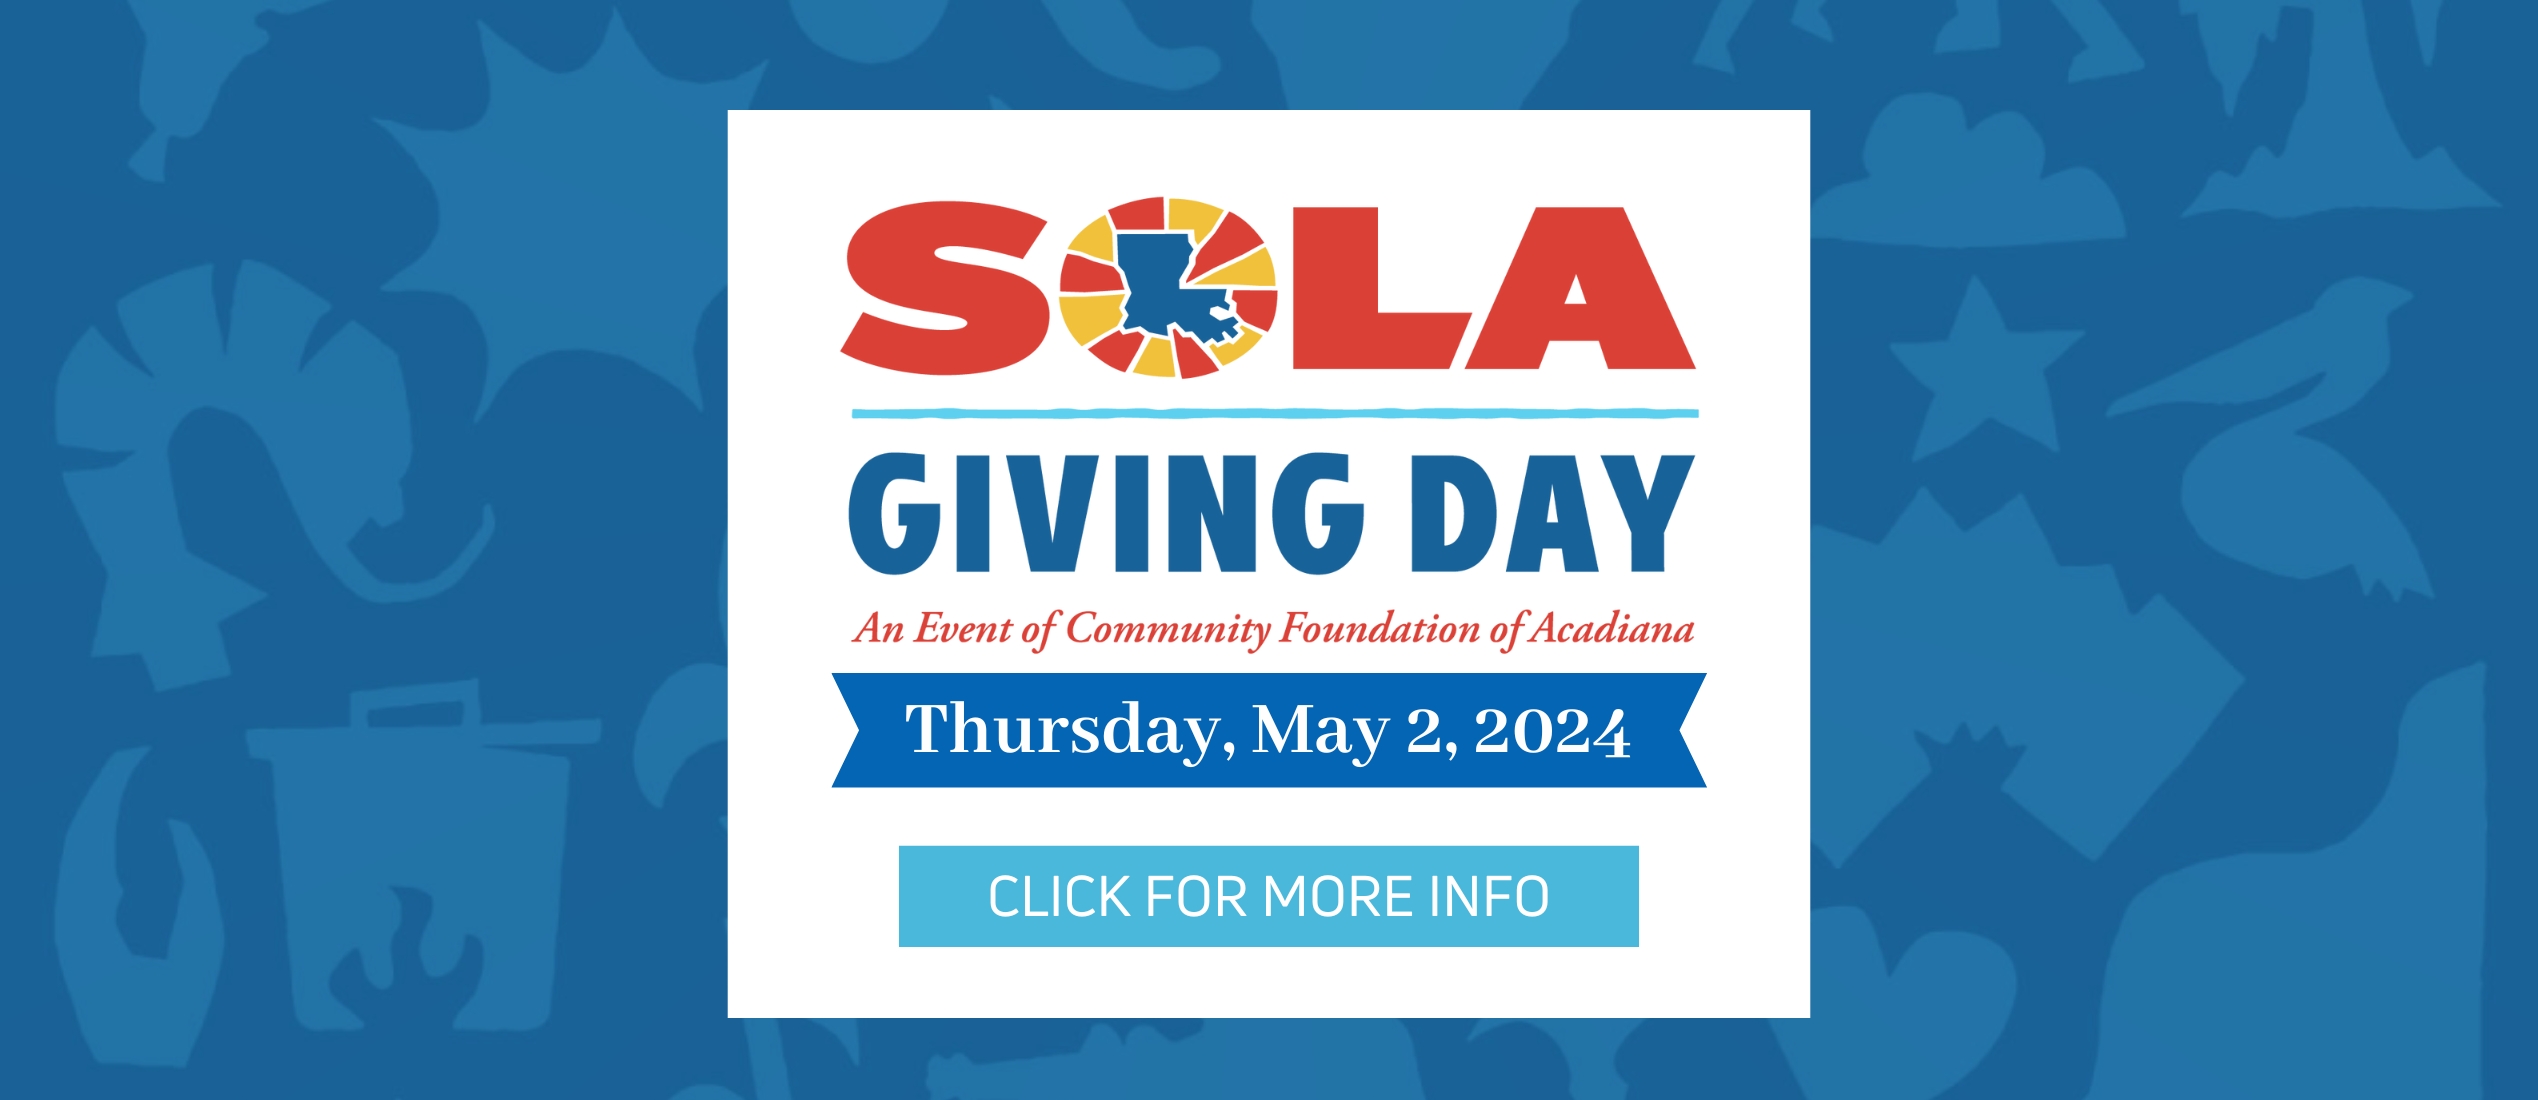 SOLA Giving Day